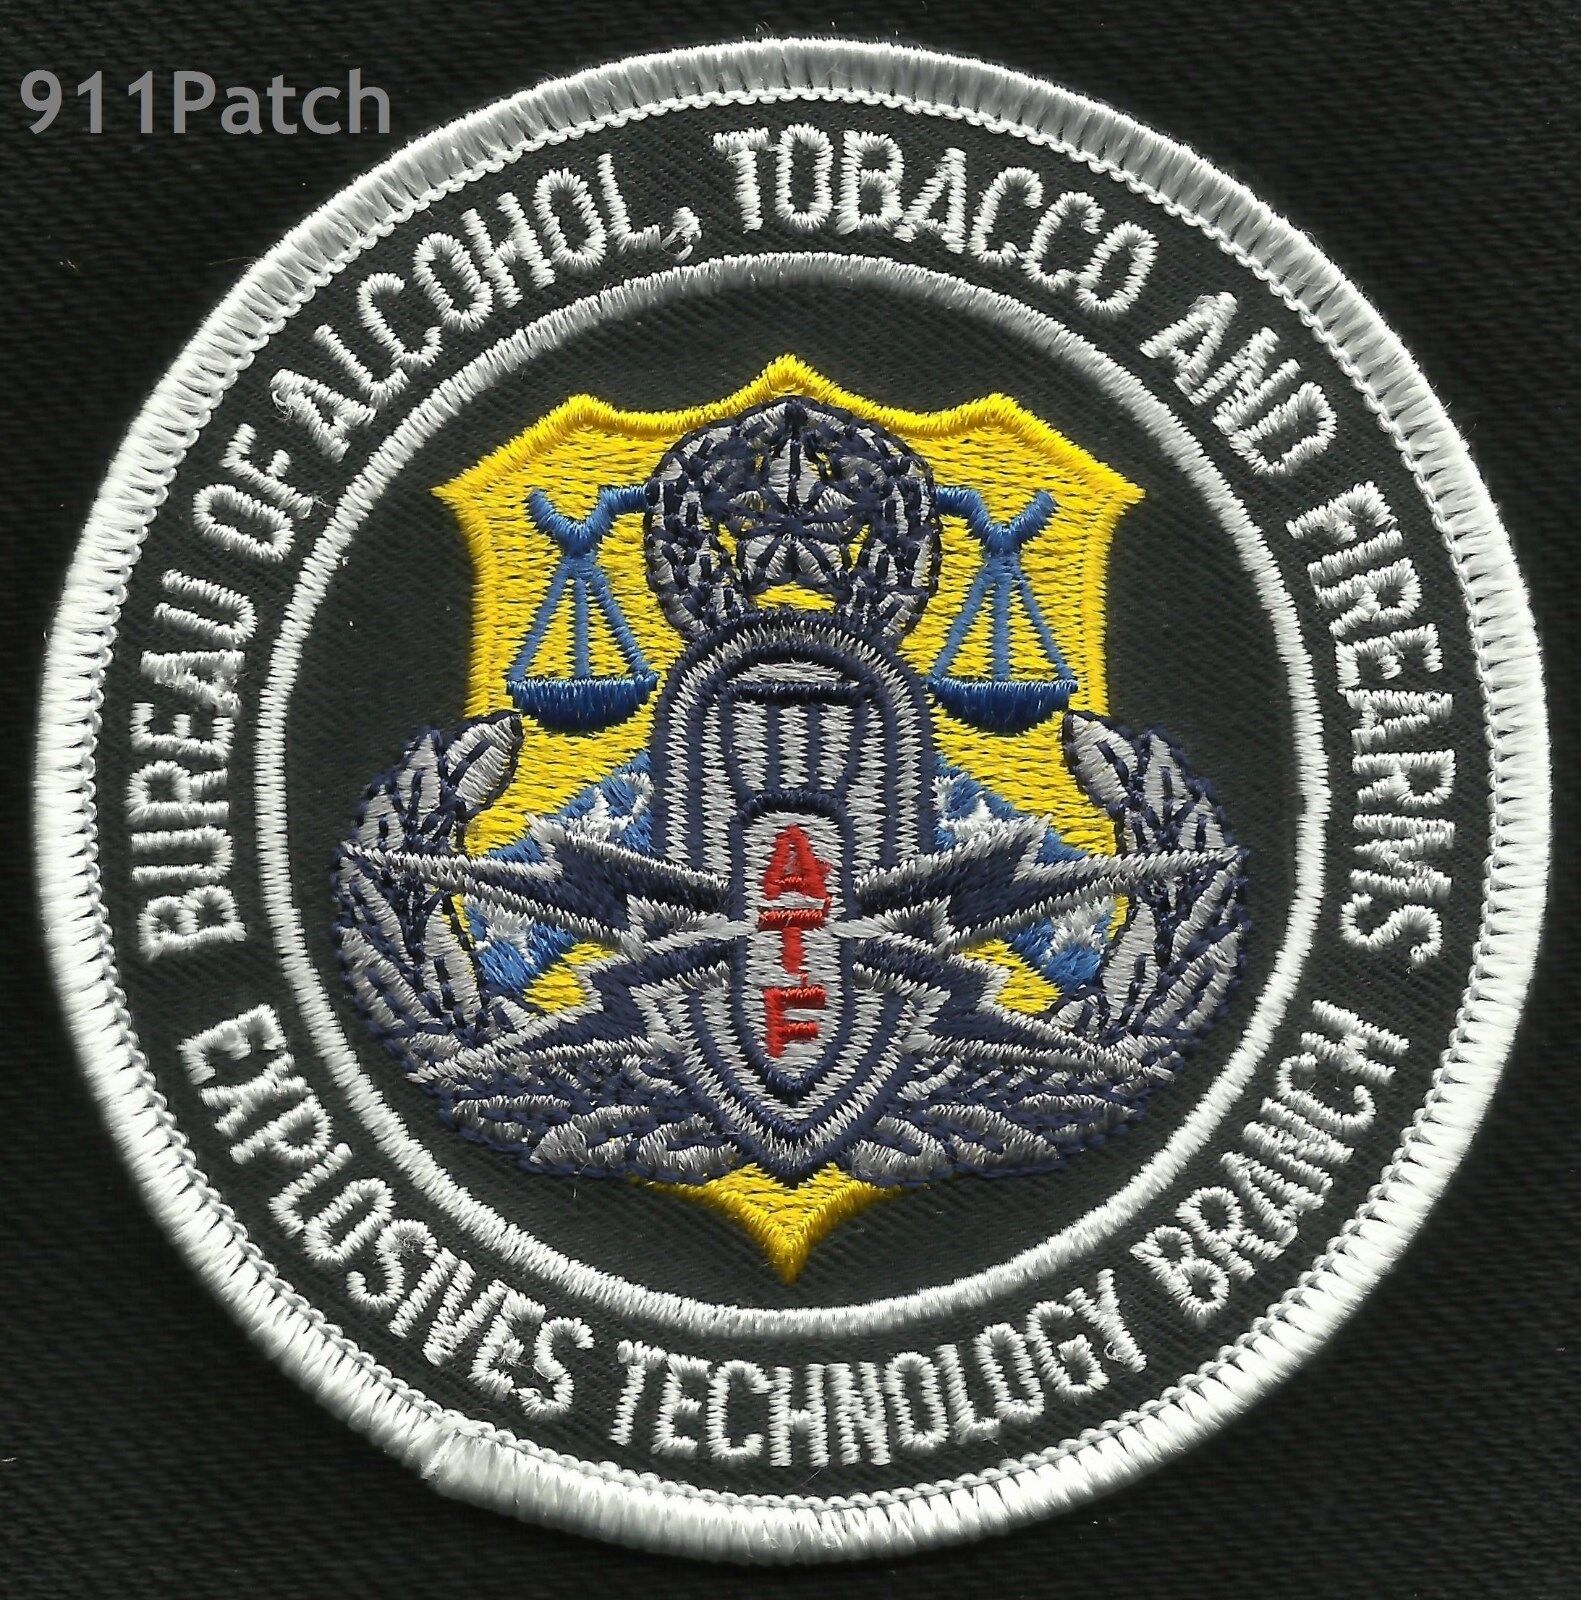 ATF - Alcohol Tobacco & Firearms - Explosives Technology Branch POLICE Patch